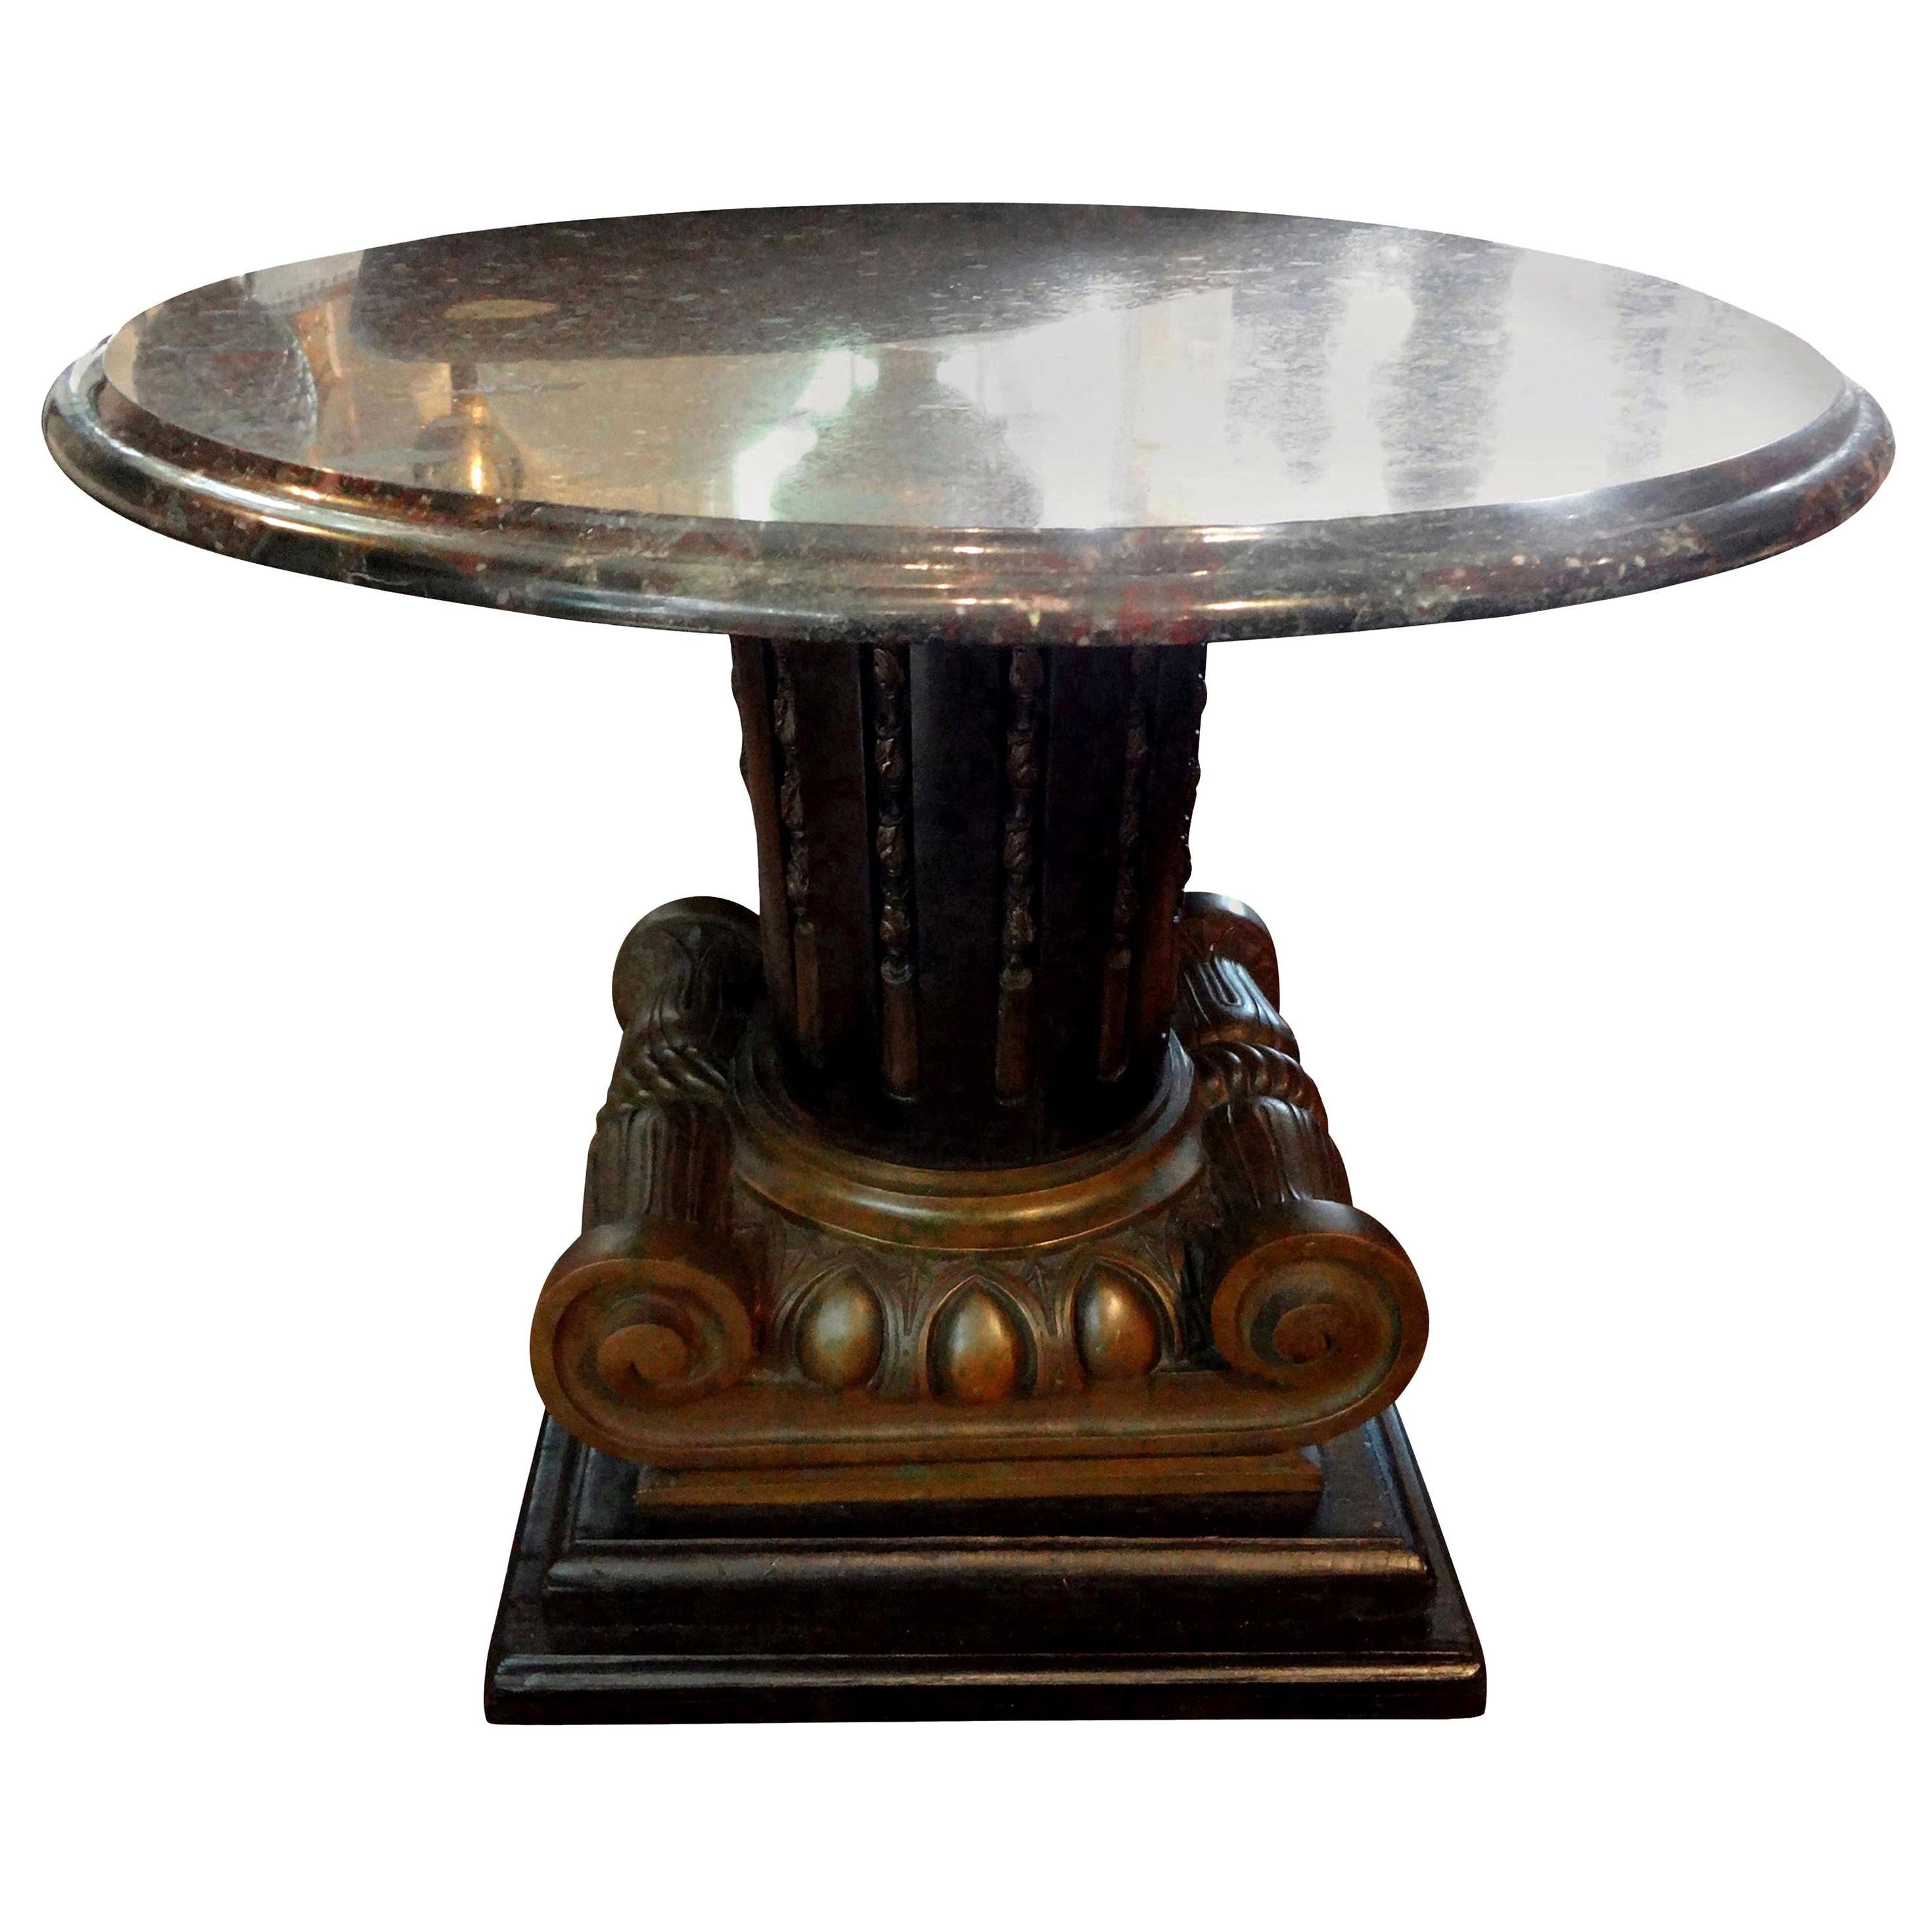 Italian neoclassical style bronze Ionic column table with marble top.
Stunning antique Italian bronze ionic column table with a marble top. This beautiful Italian Neoclassical style side table, drink table or guéridon is comprised of finely